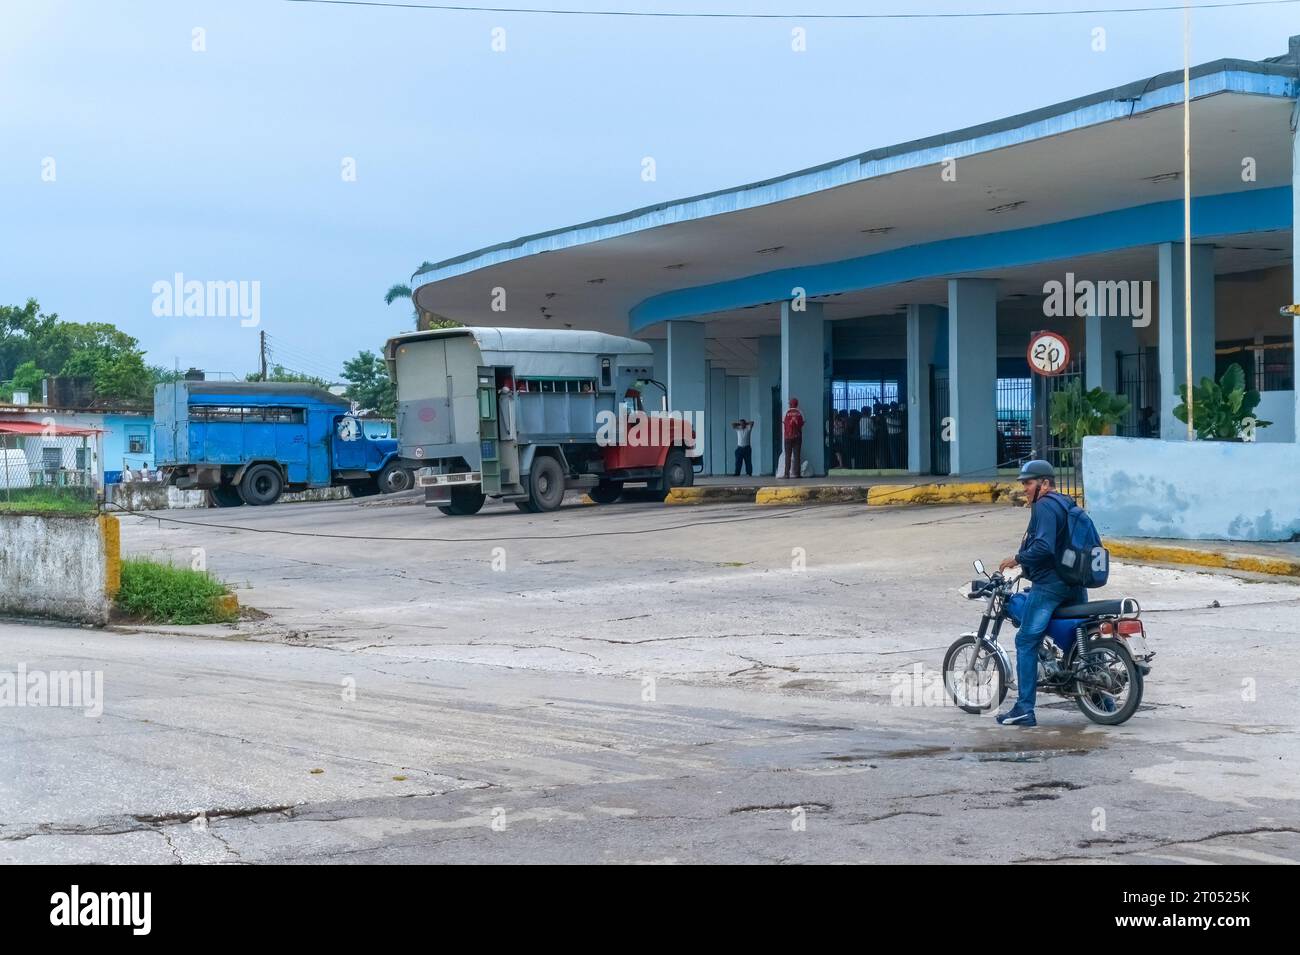 A man rides a motorcycle by the Intermunicipal BusTerminal. Instead of buses, transportation is accomplished by privately operated trucks arrange to m Stock Photo